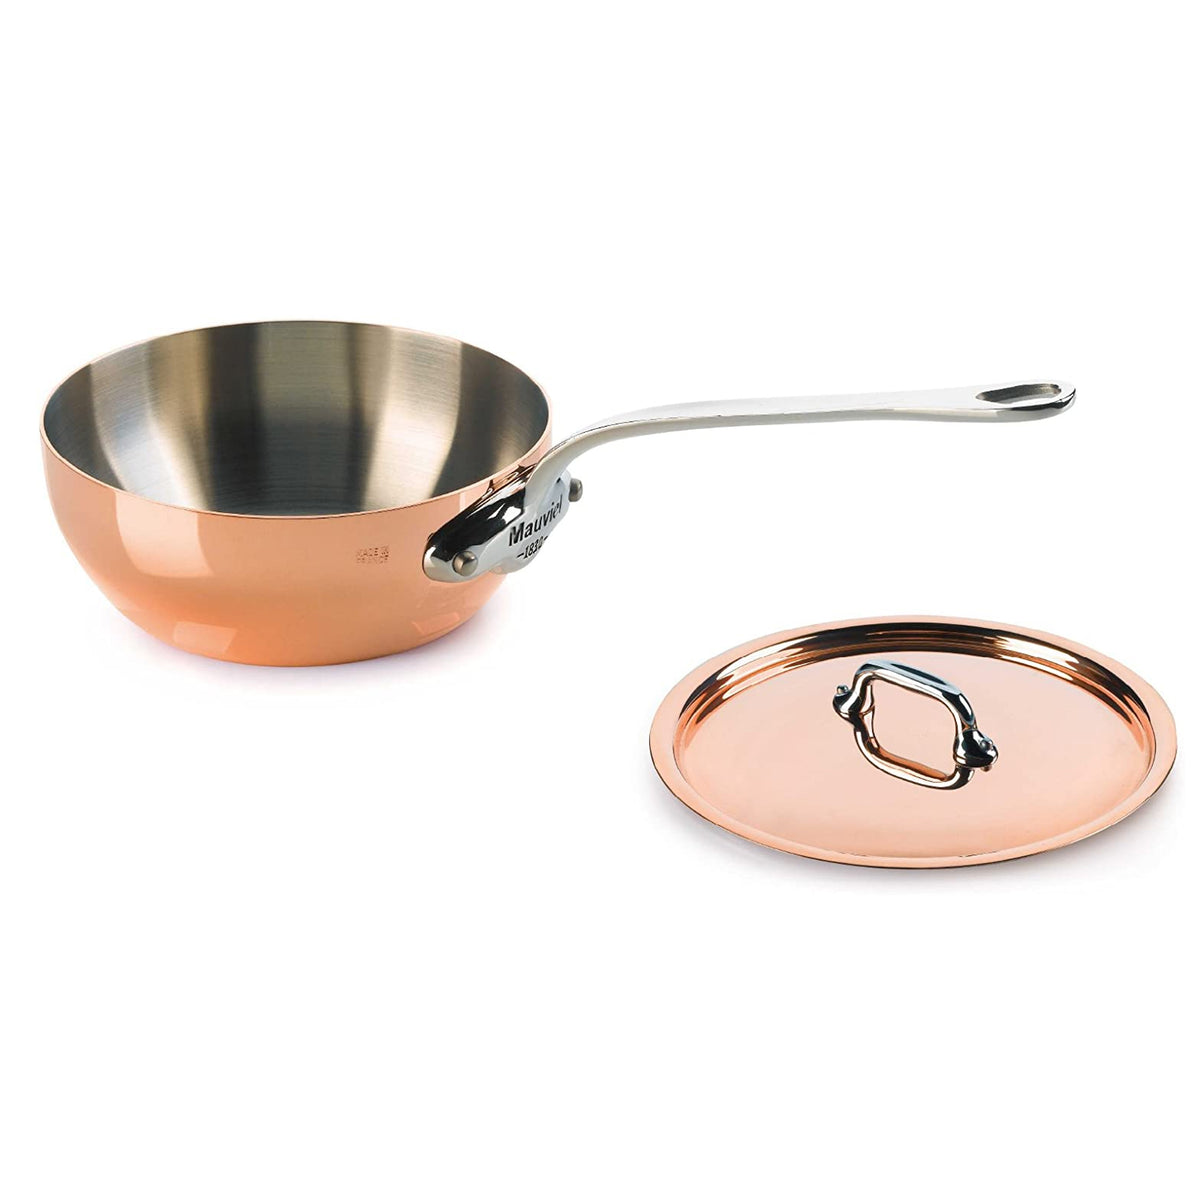 https://www.sukaldeusa.com/cdn/shop/products/Mauviel-M_150s-Copper-_-Stainless-Steel-Curved-Splayed-Saute-Pan-With-Lid_-1.1-Quart_1200x1200.jpg?v=1615998287